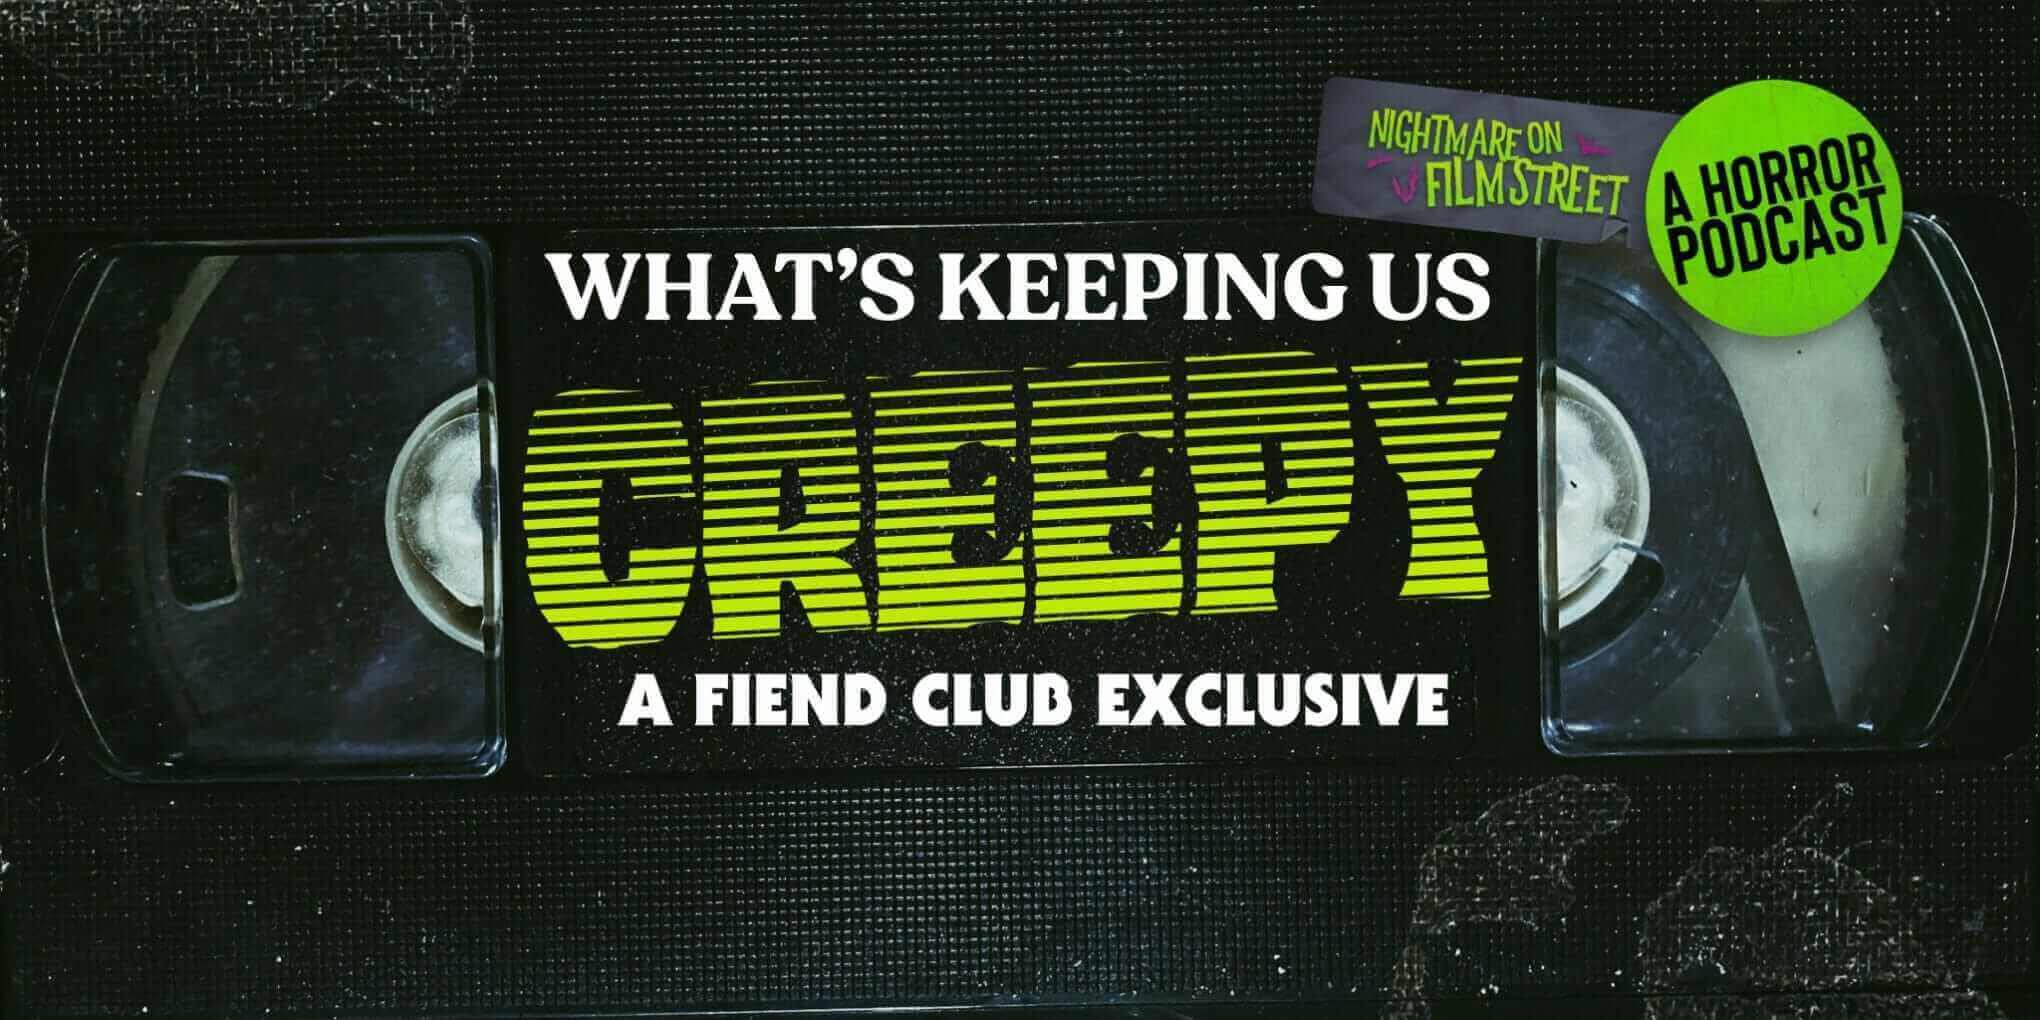 what's Keeping us Creepy - fiend club podcast - nightmare on film street